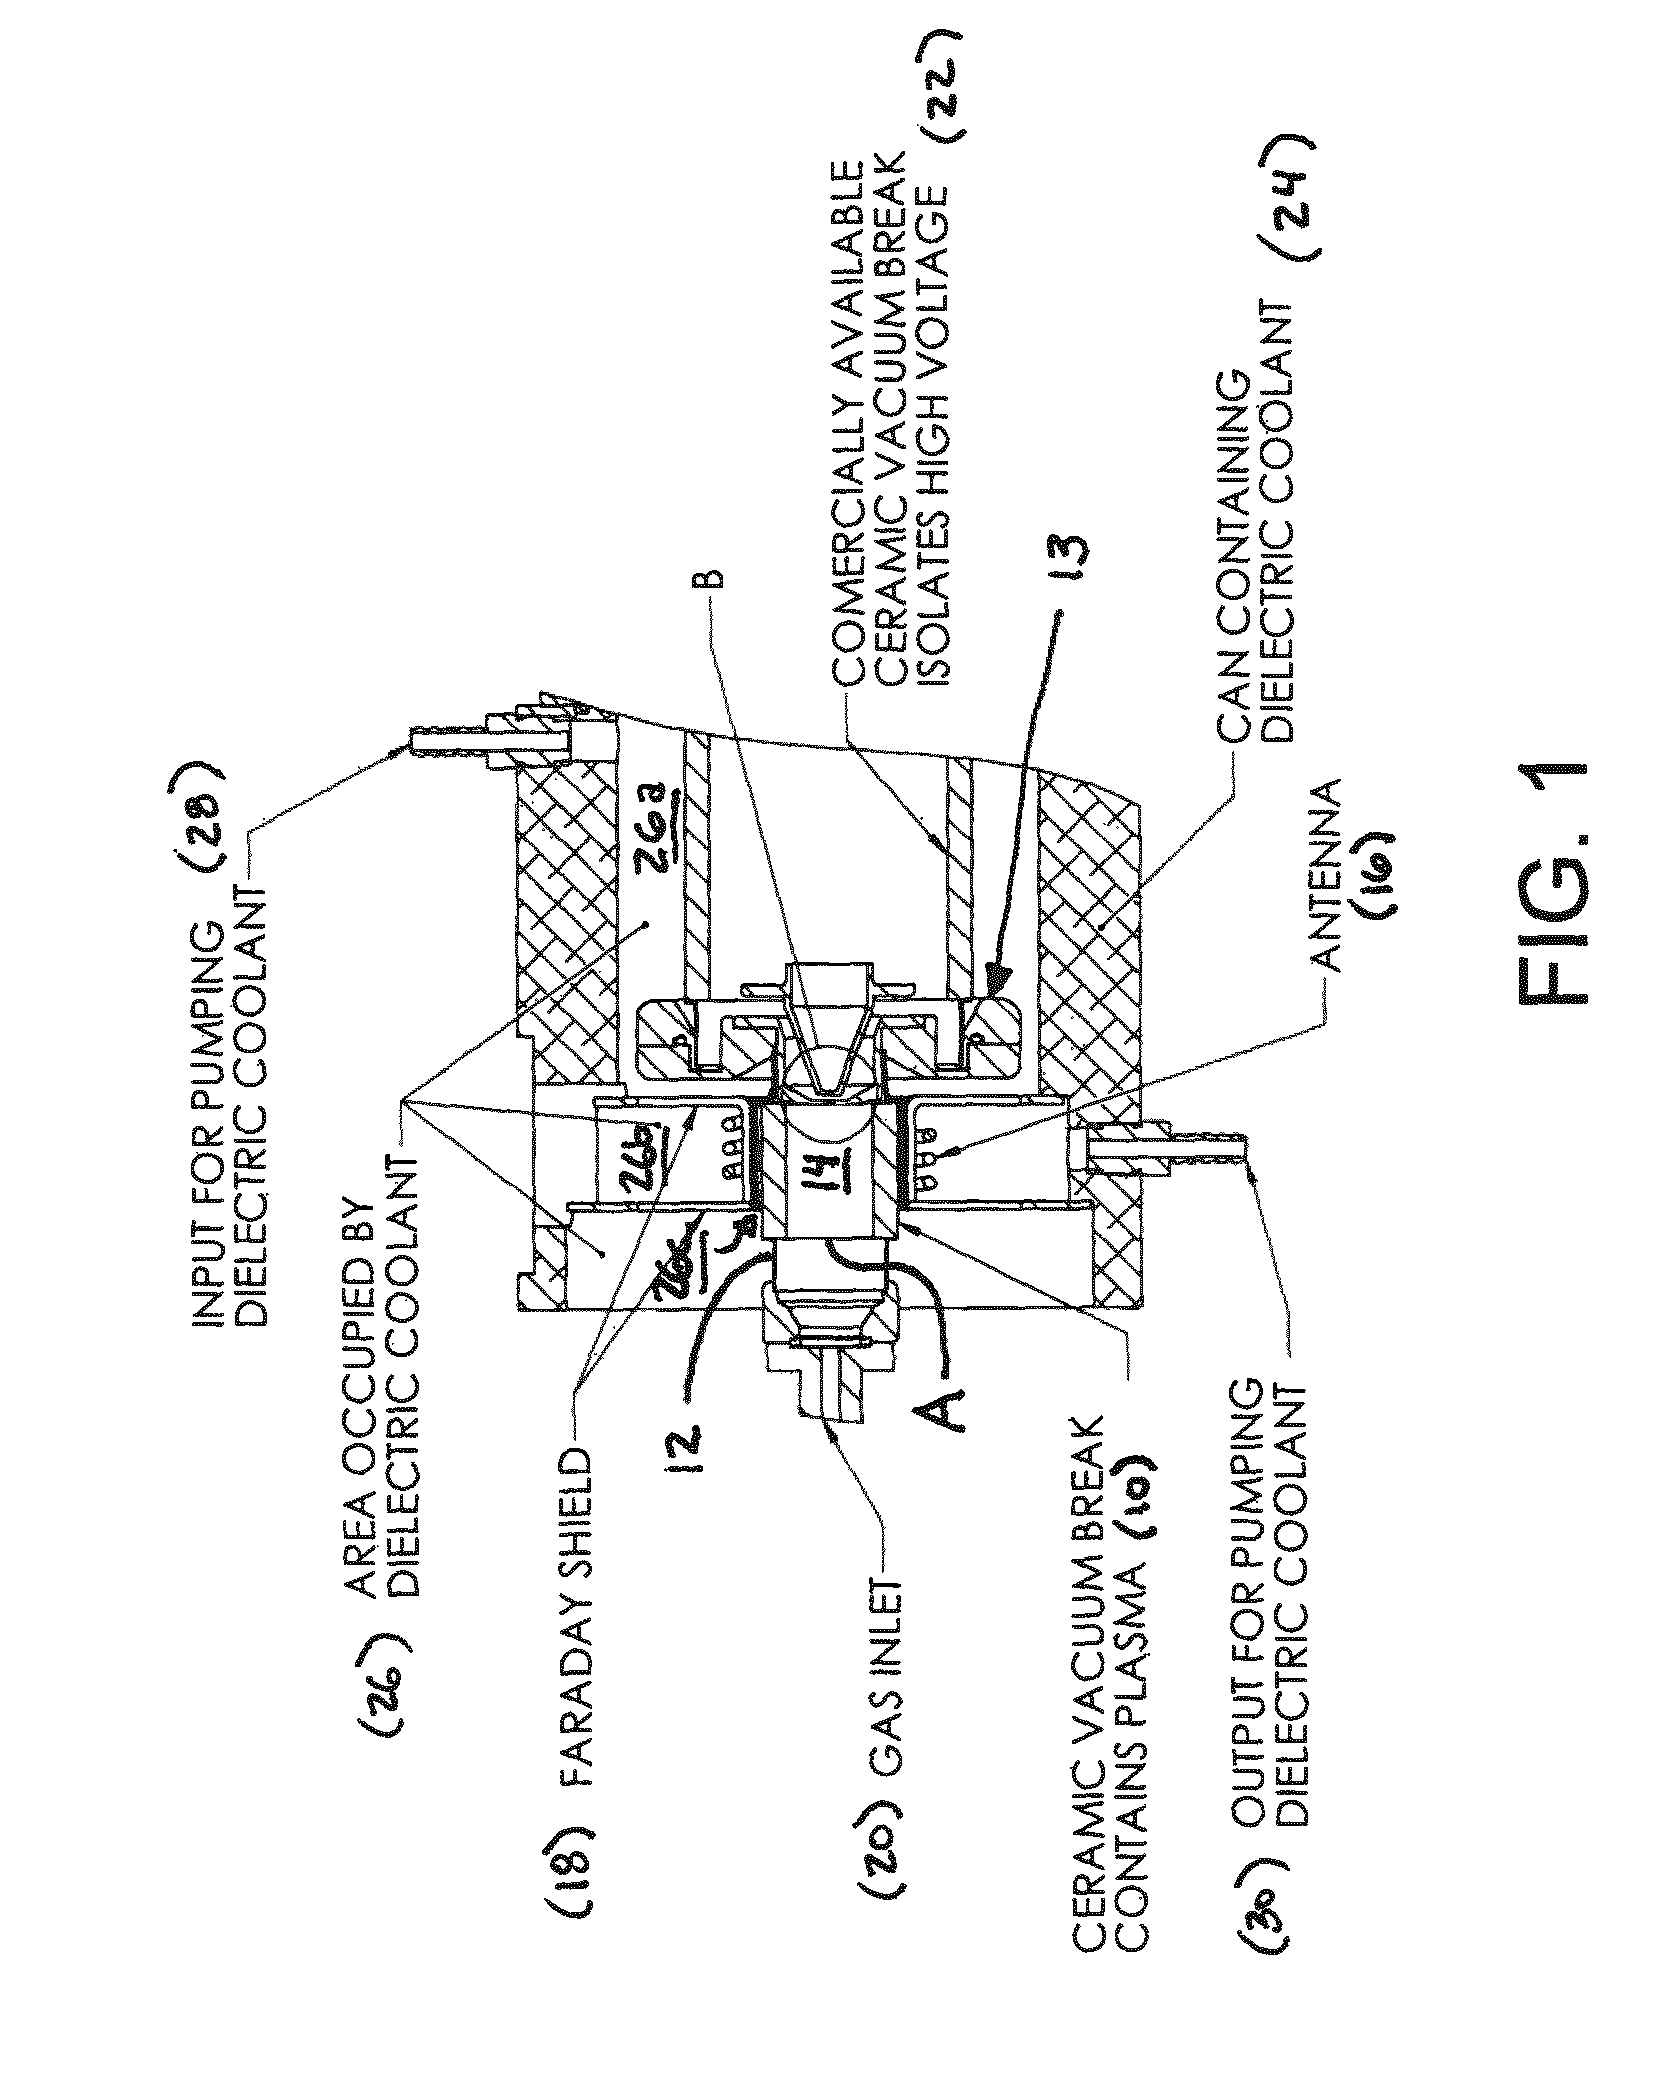 High voltage isolation and cooling for an inductively coupled plasma ion source